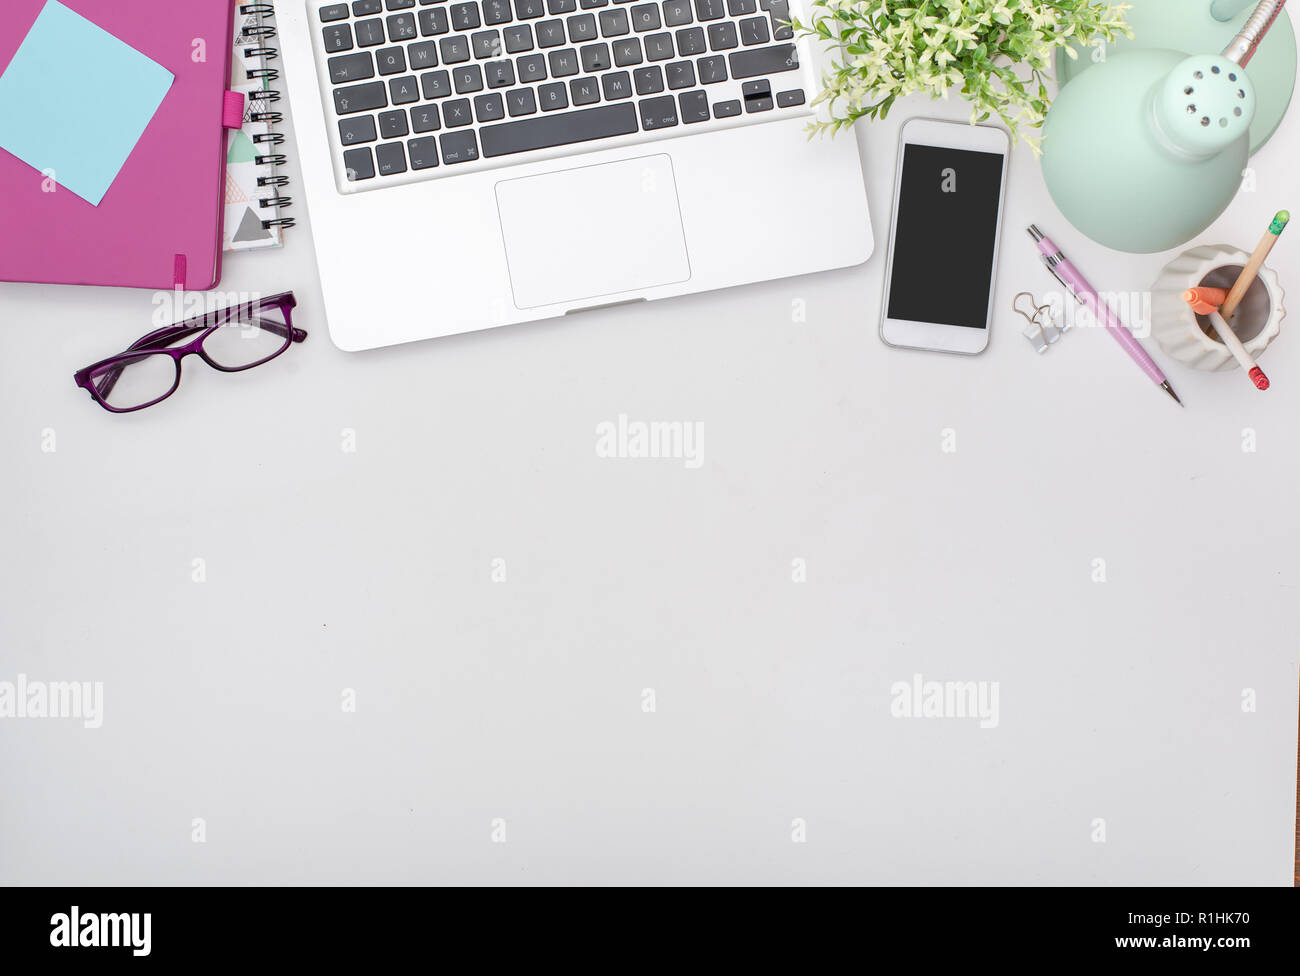 Top view home office desk mobile web design template Stock Photo